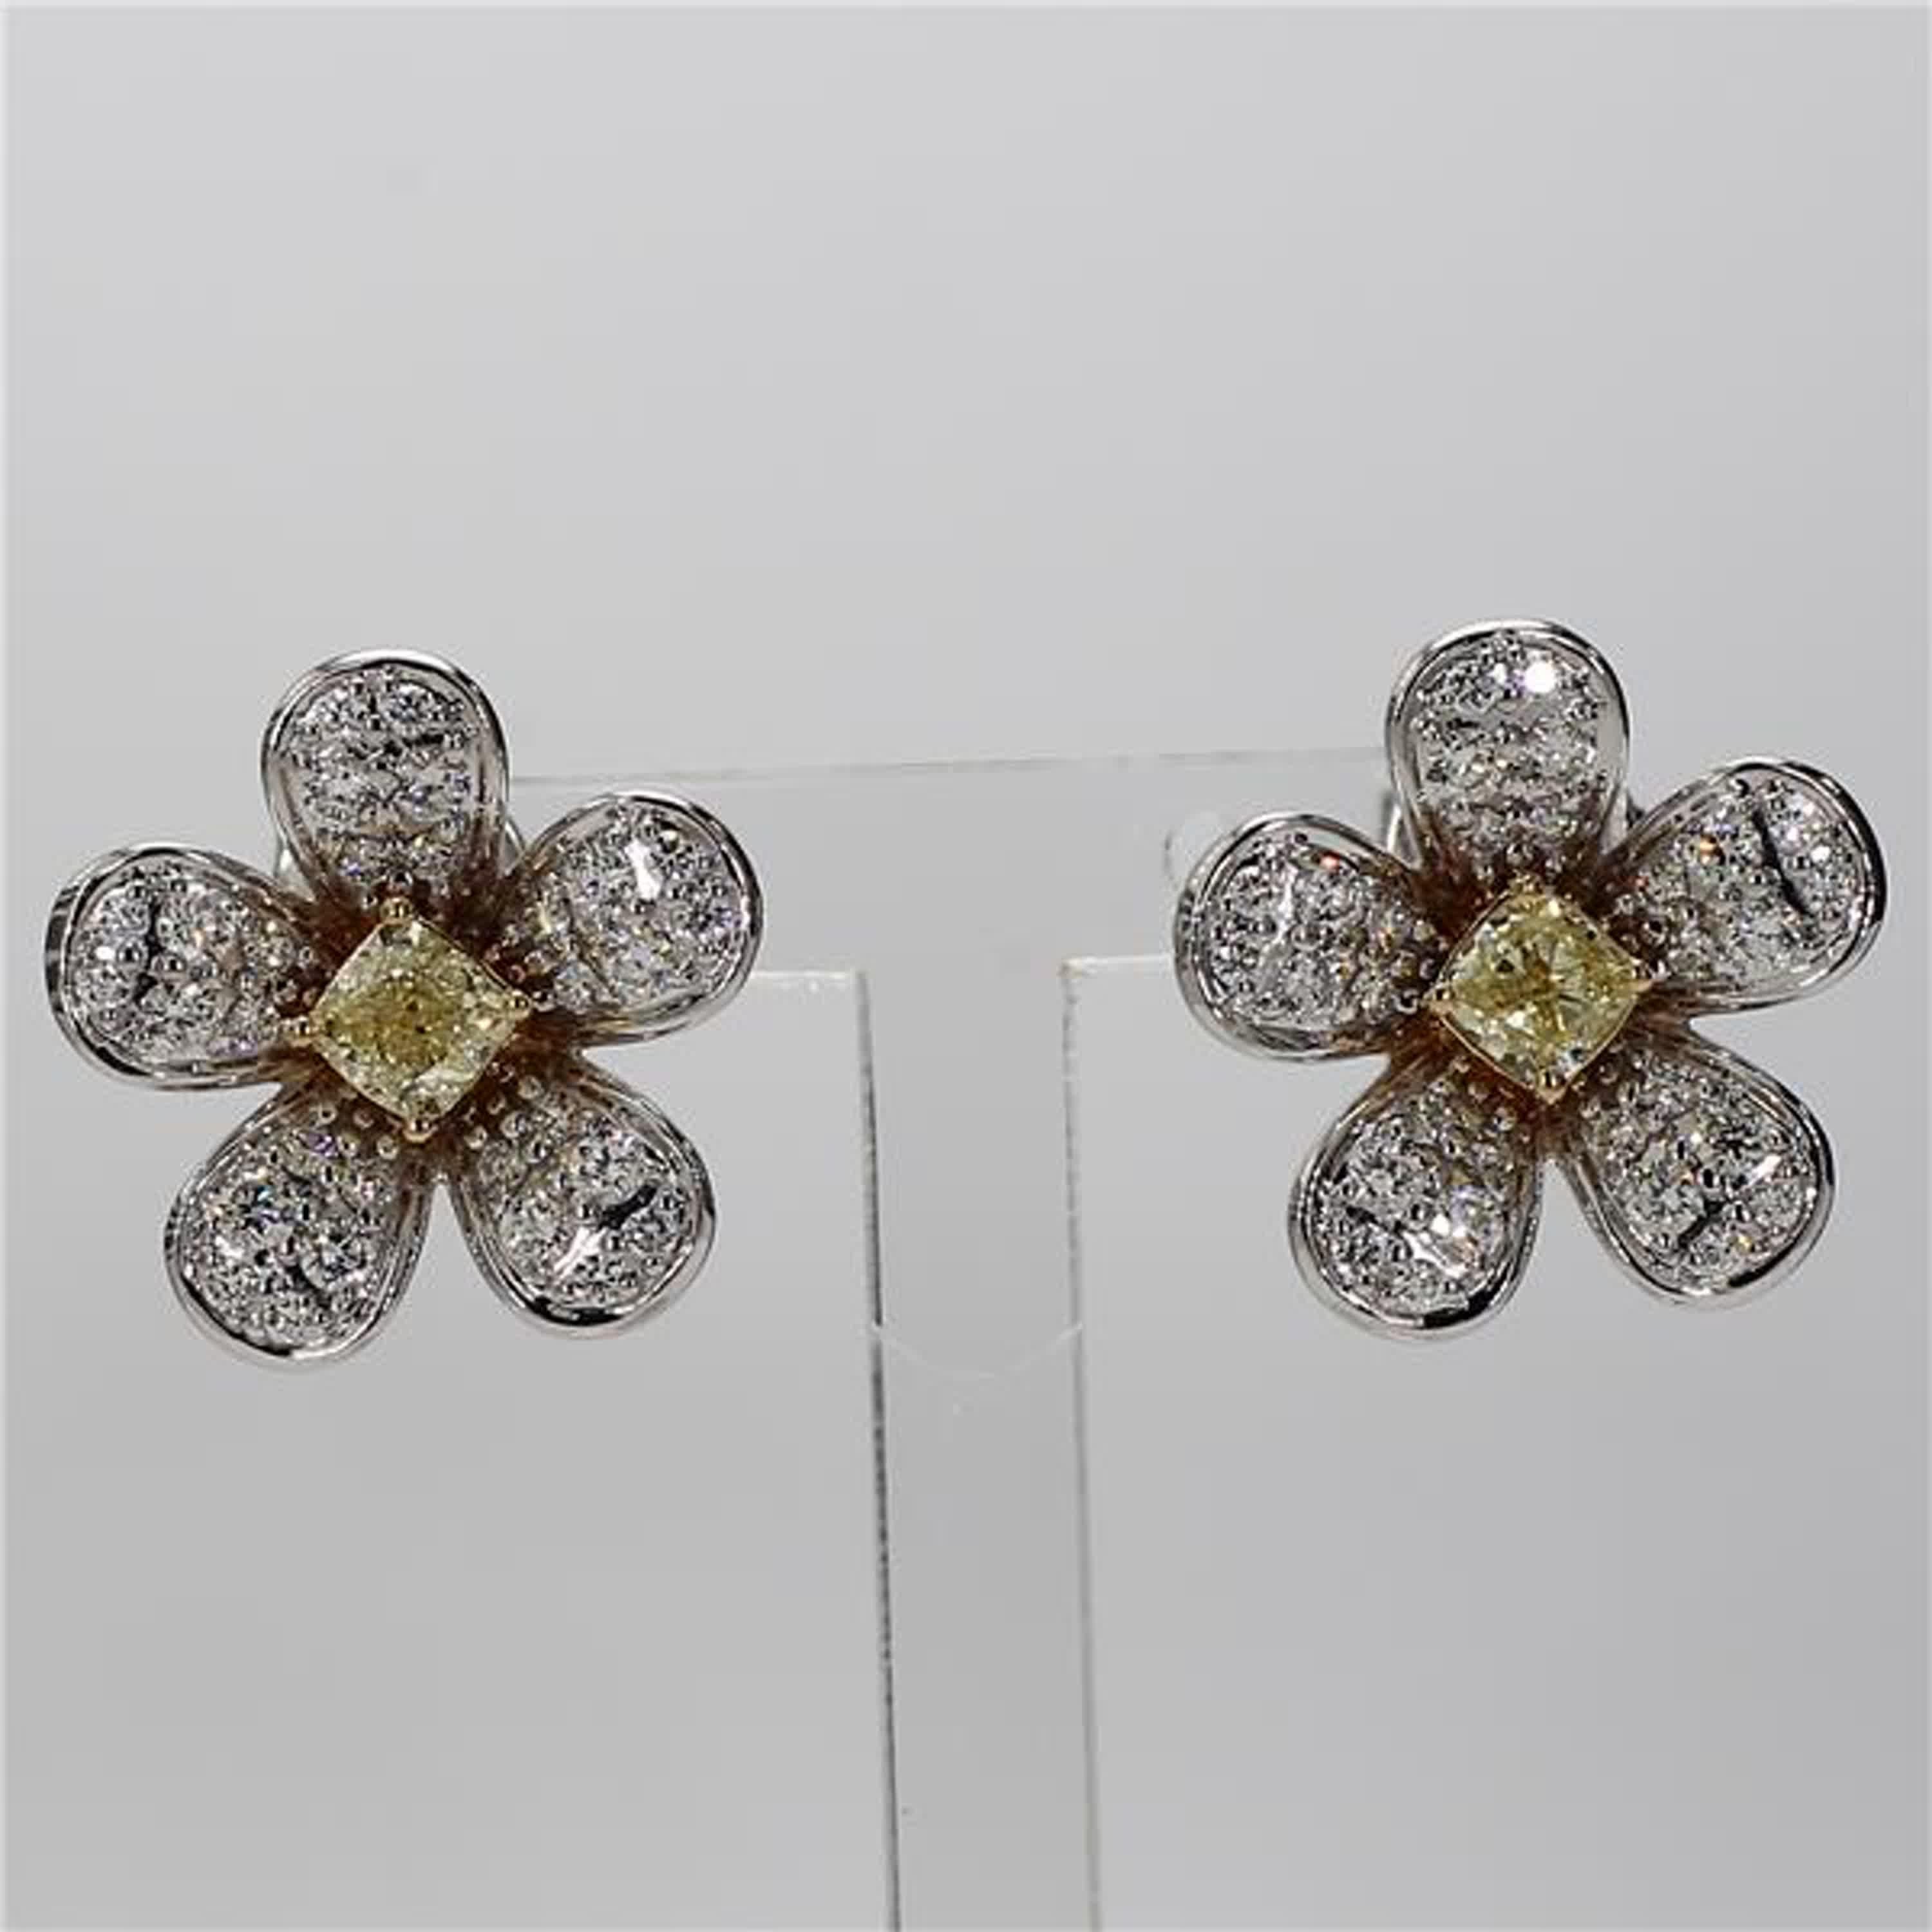 RareGemWorld's classic diamond earrings. Mounted in a beautiful 18K Yellow and White Gold setting with natural radiant cut yellow diamonds. The yellow diamonds are surrounded by small round natural white diamond melee in a beautiful flower shape.